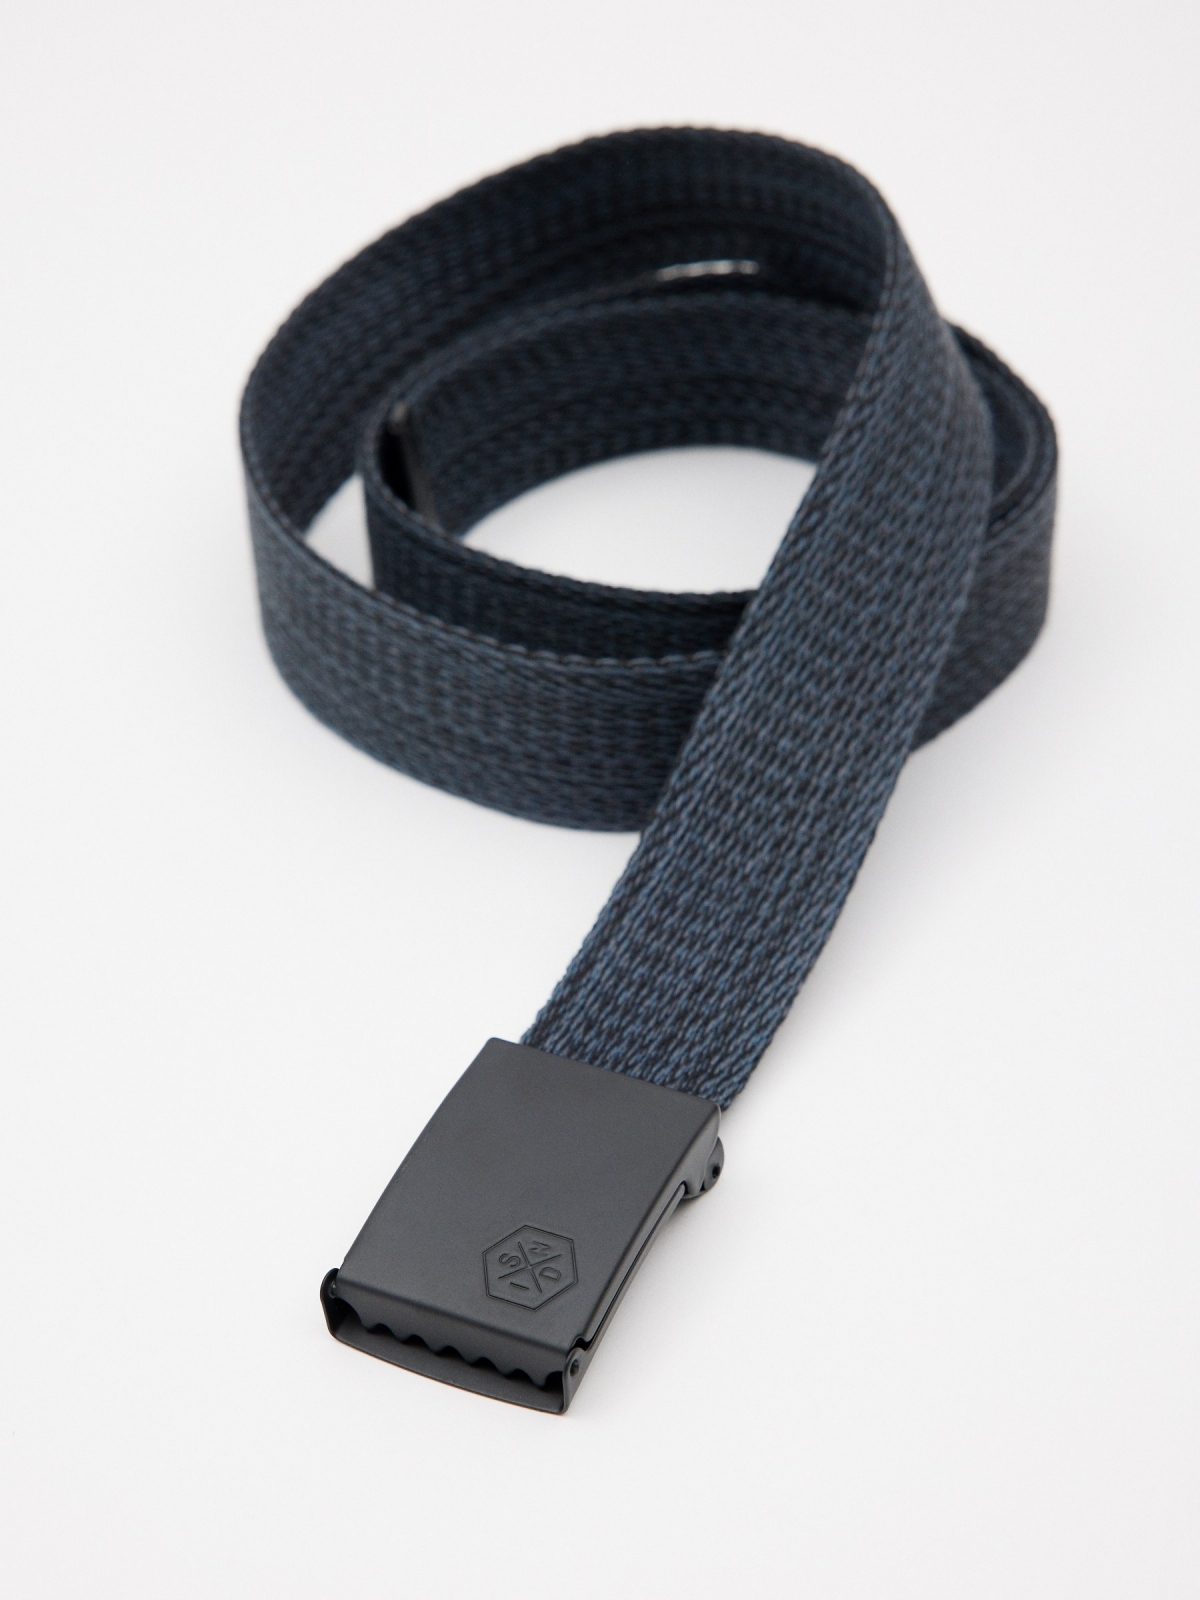 Marbled canvas belt blue buckle